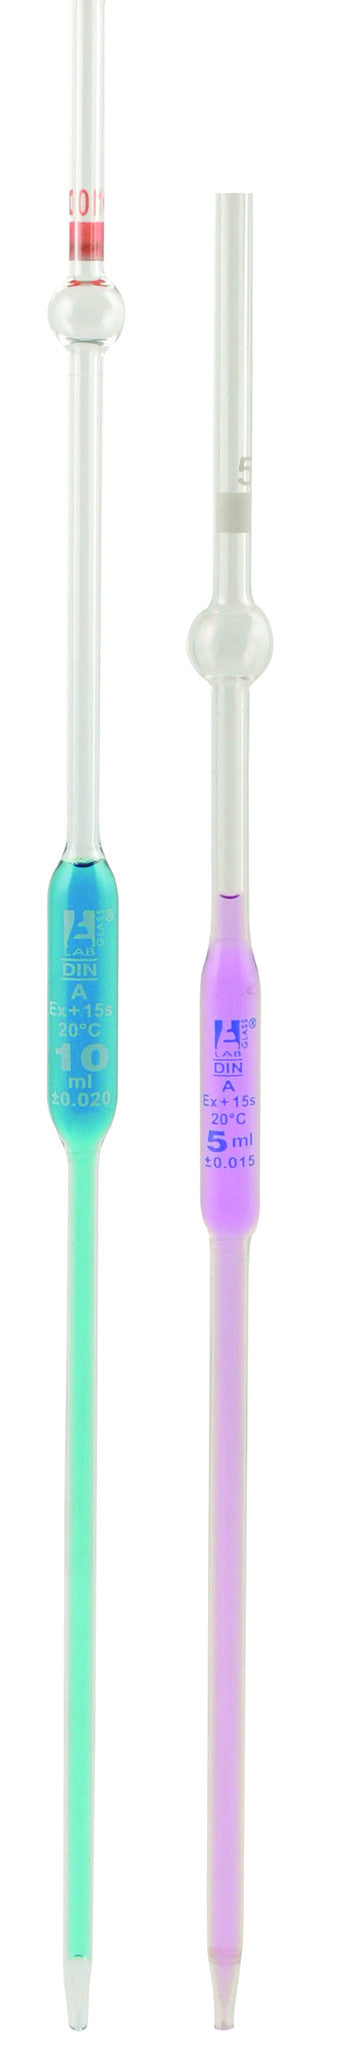 Pipettes Class - B with Safety Bulb, 1 ml, White Graduation